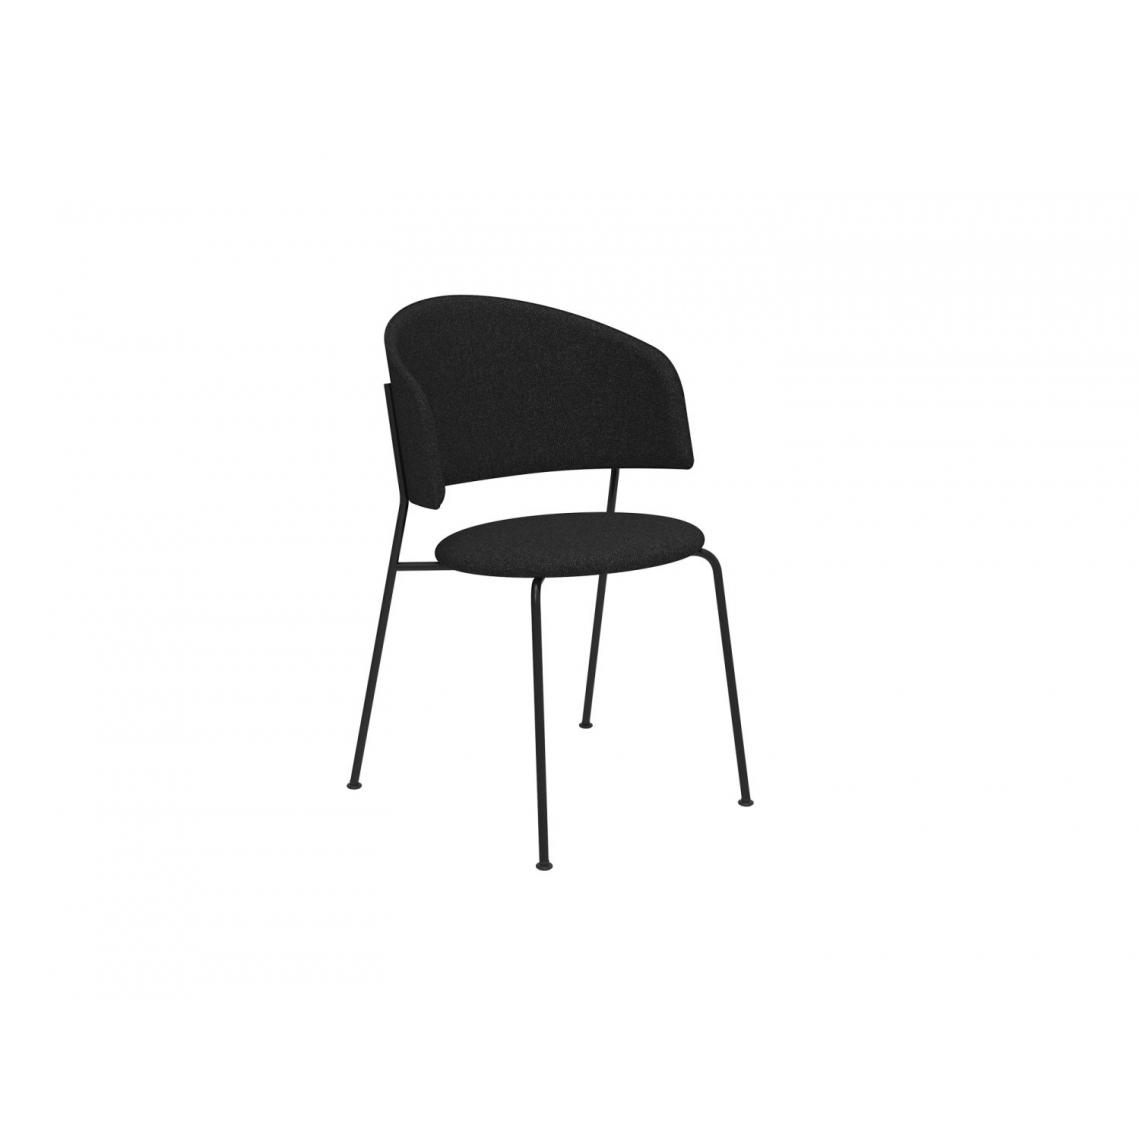 Objekte Unserer Tage - Wagner Dining Chair - noir - anthracite - Chaises